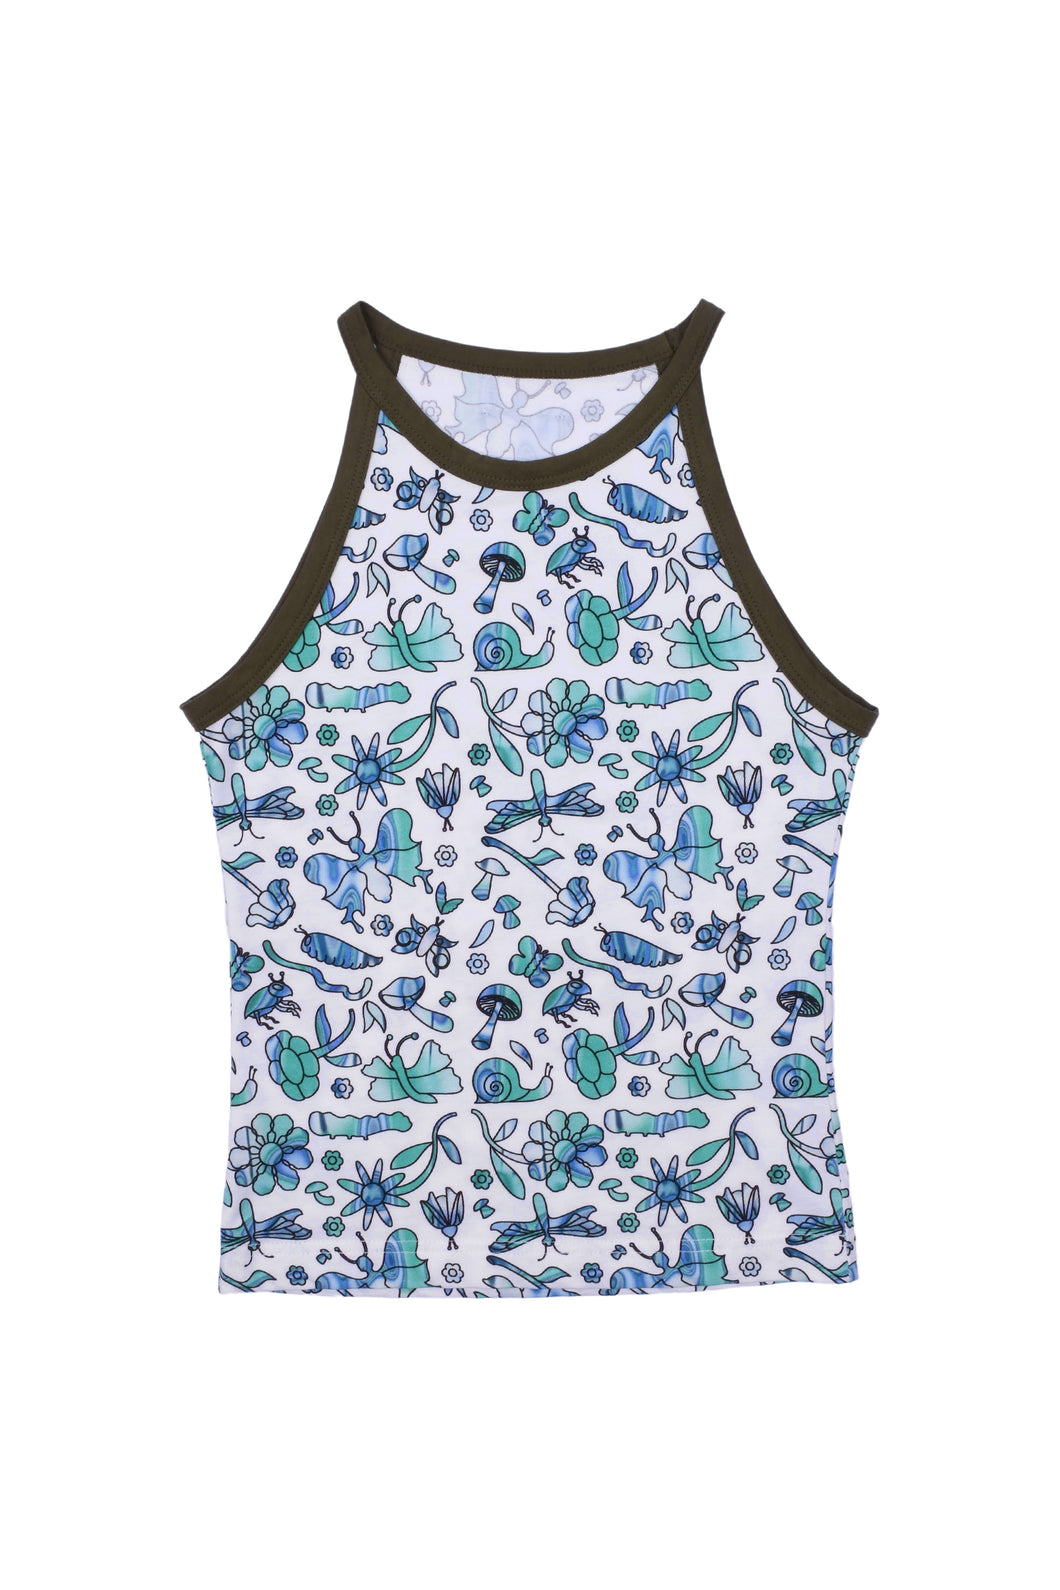 BUG FLORAL PRINT CAMISOLE (White)